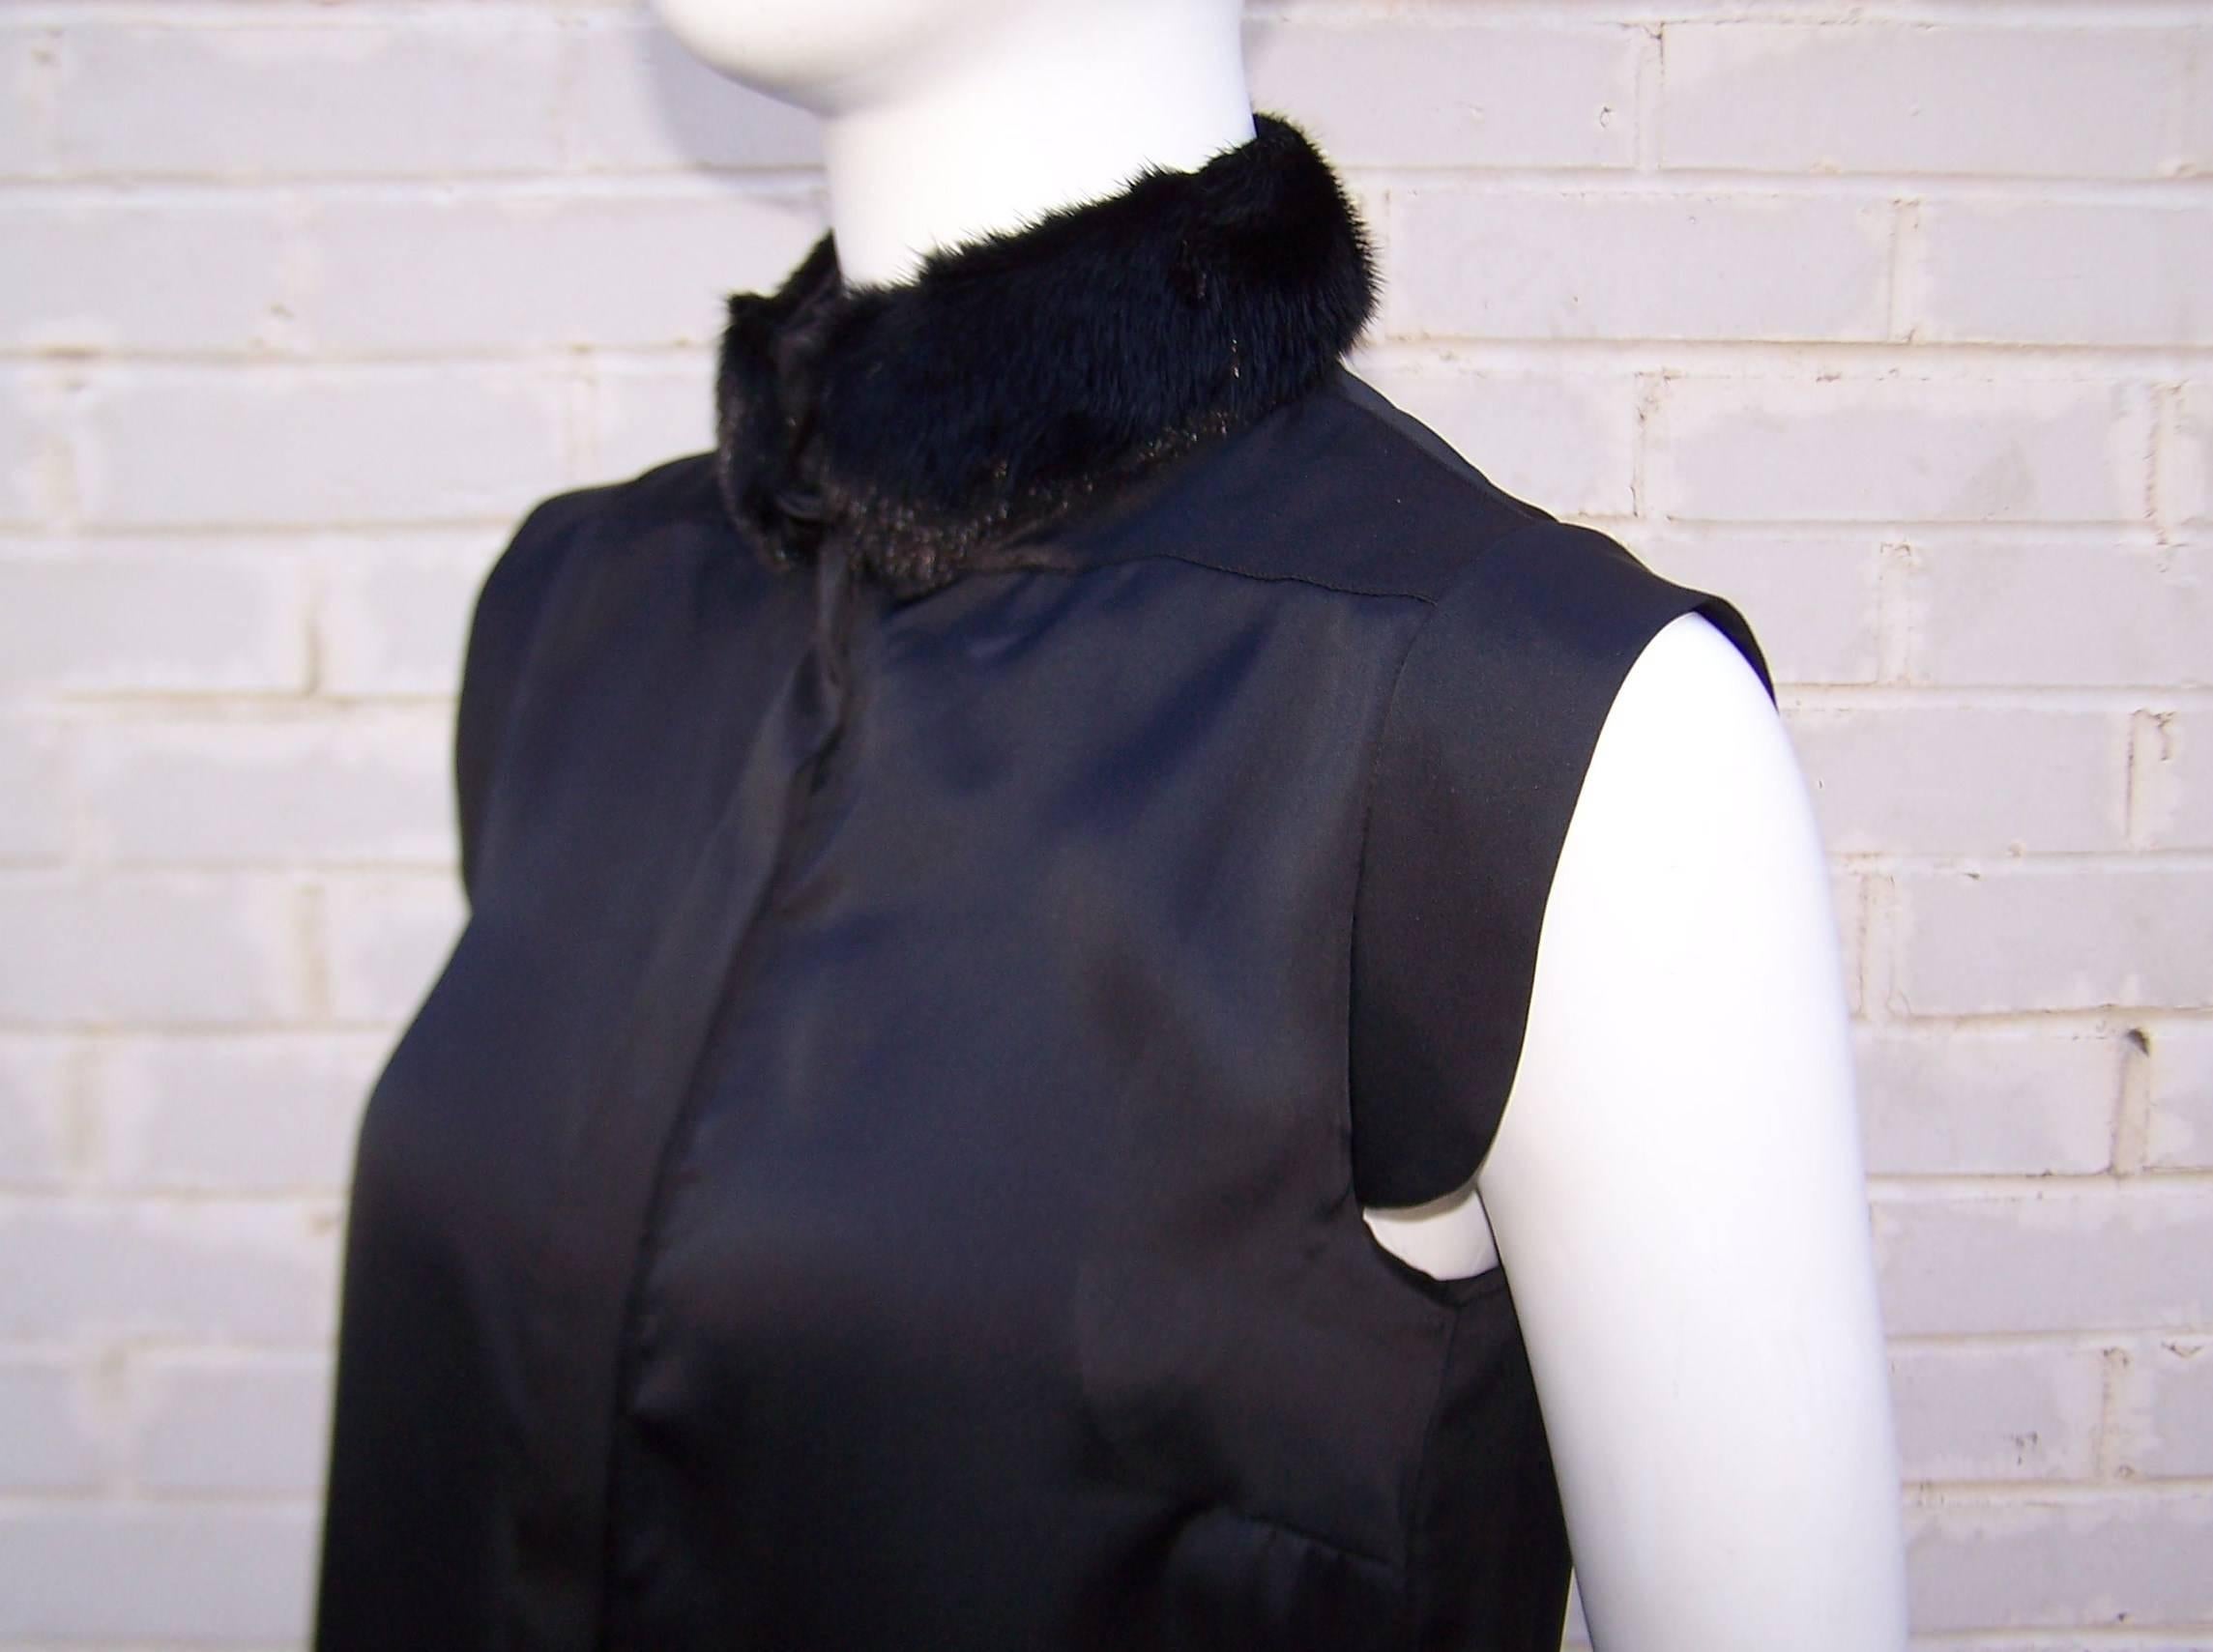 Women's 2014 Riccardo Tisci for Givenchy Black Silk Top With Removable Mink Collar